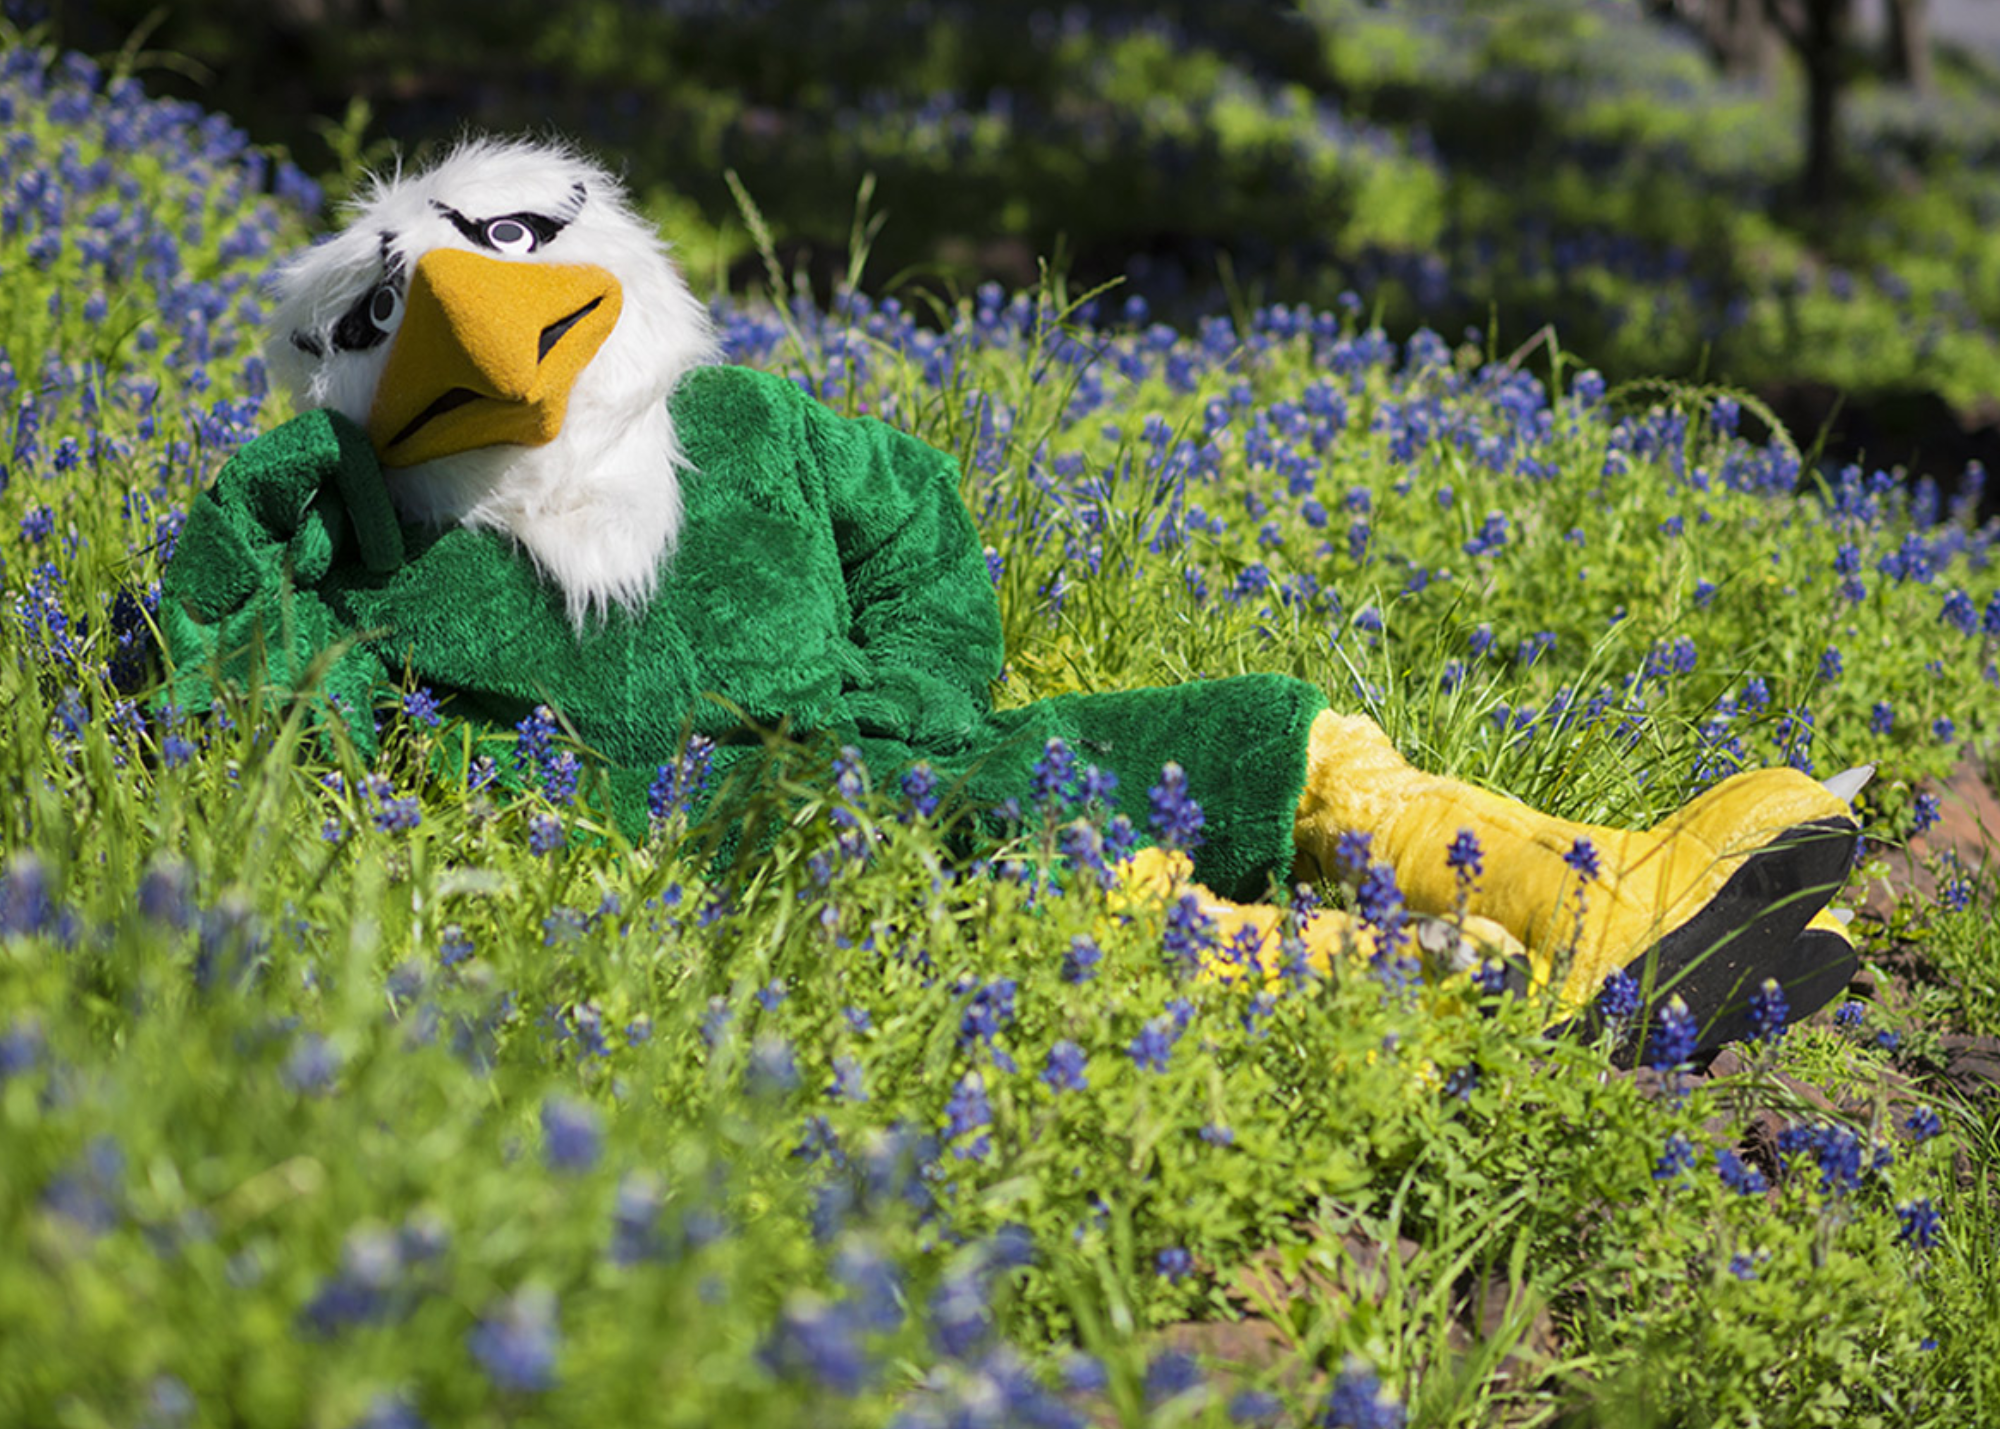 Scrappy the Eagle mascot in a field of flowers.